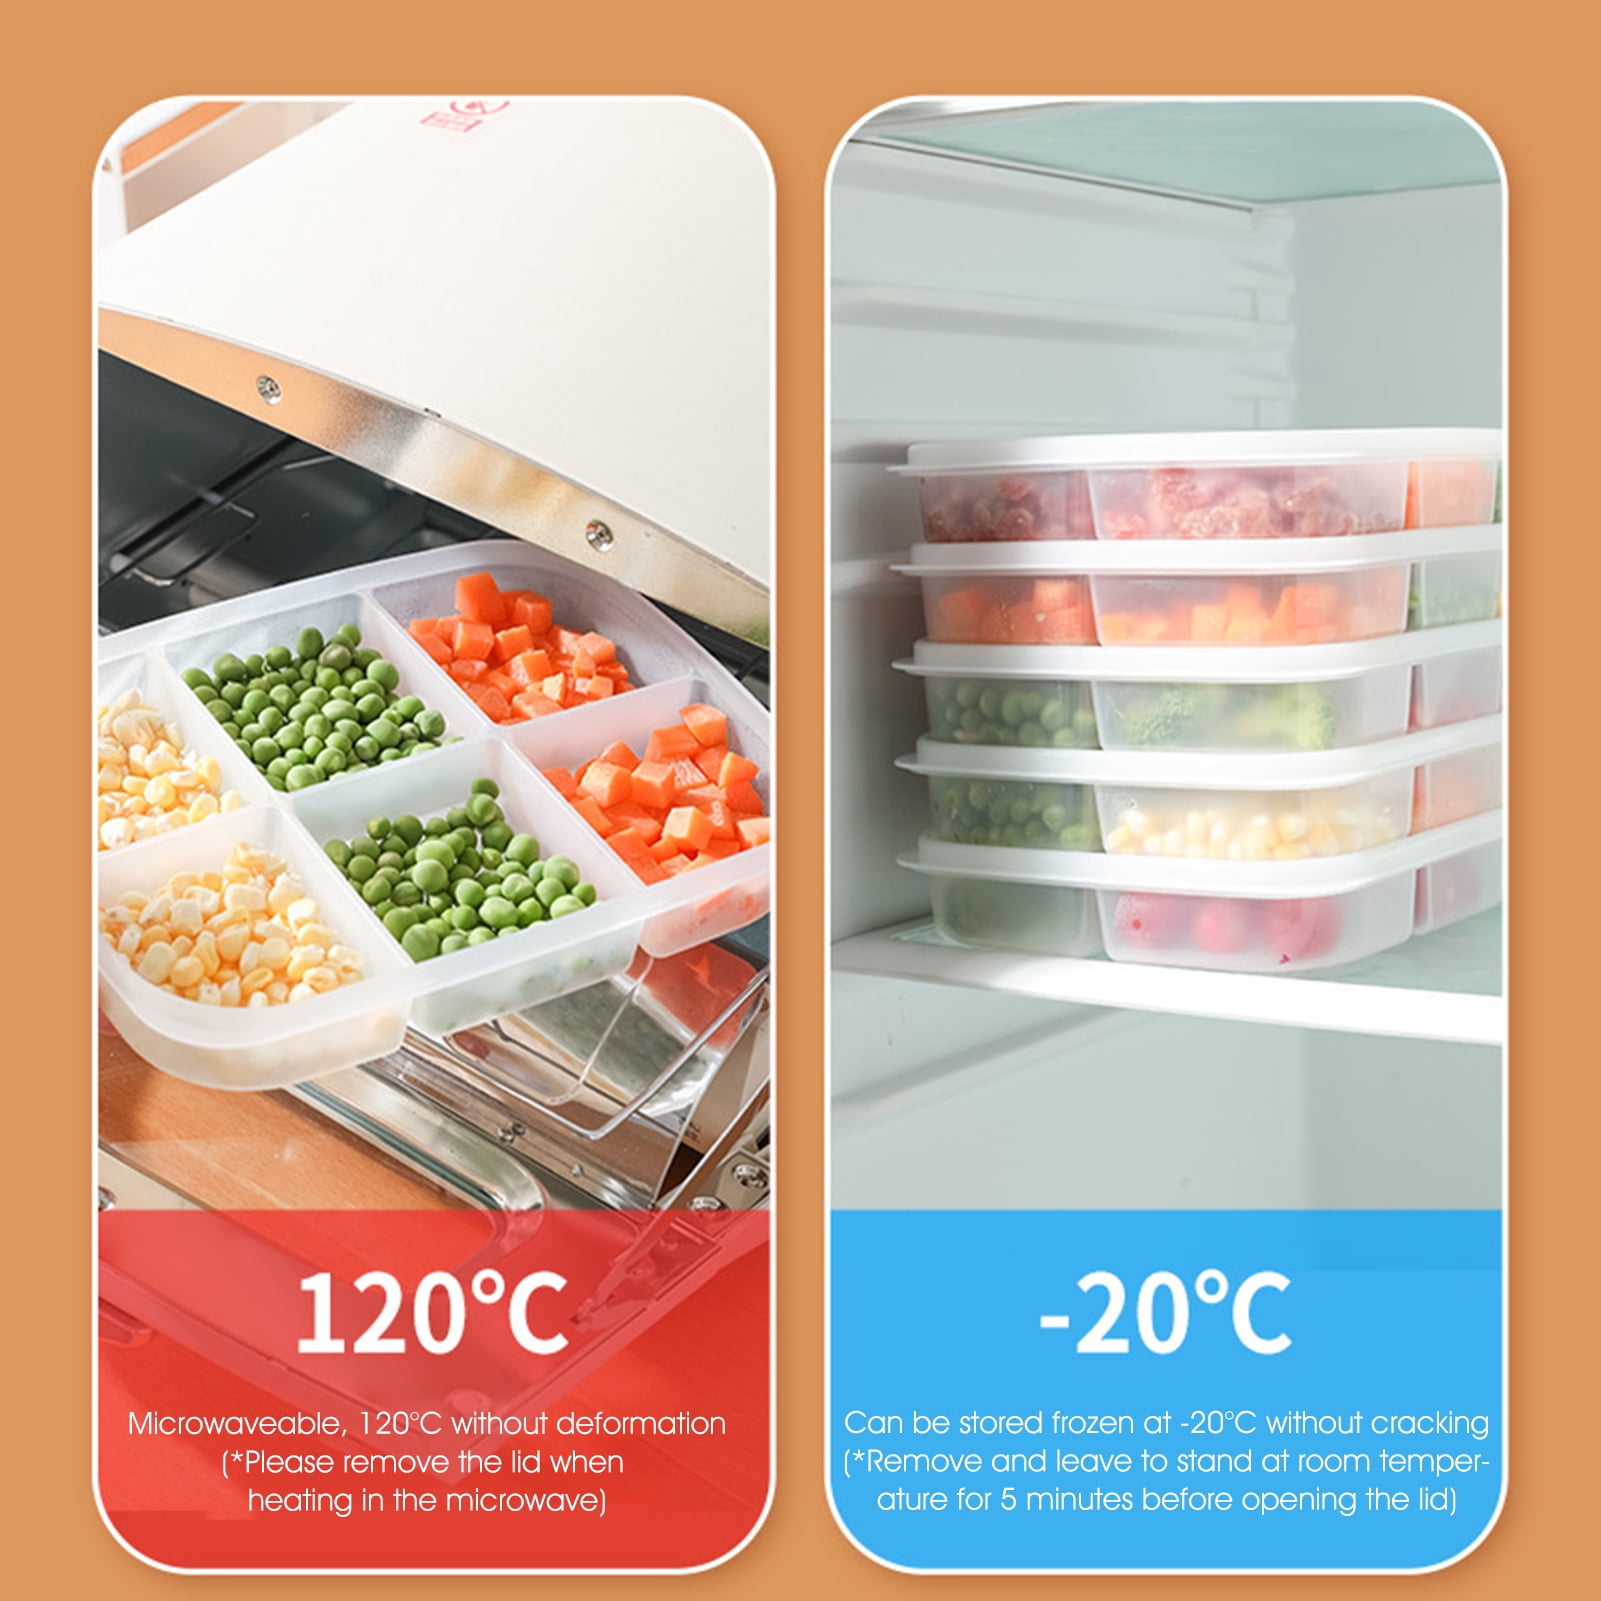 Yesbay Food Grade Leak-Proof Food Container with Clear Lid Insulation Cold Preservation Large Capacity Stainless Steel Freezer Box for Dinning Room